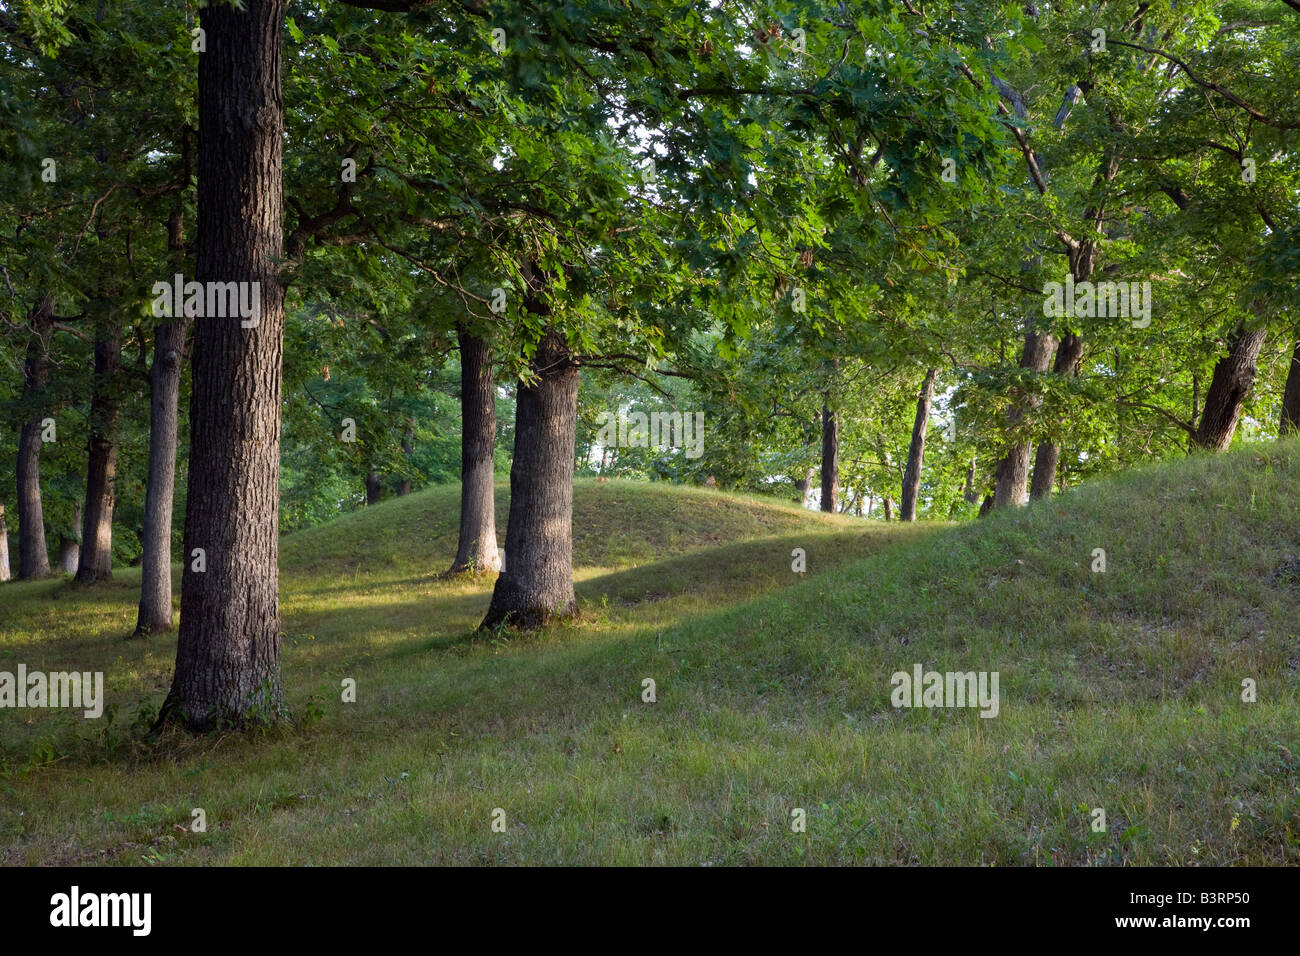 ancient Native American burial mounds, Effigy Mounds National Monument, Iowa Stock Photo